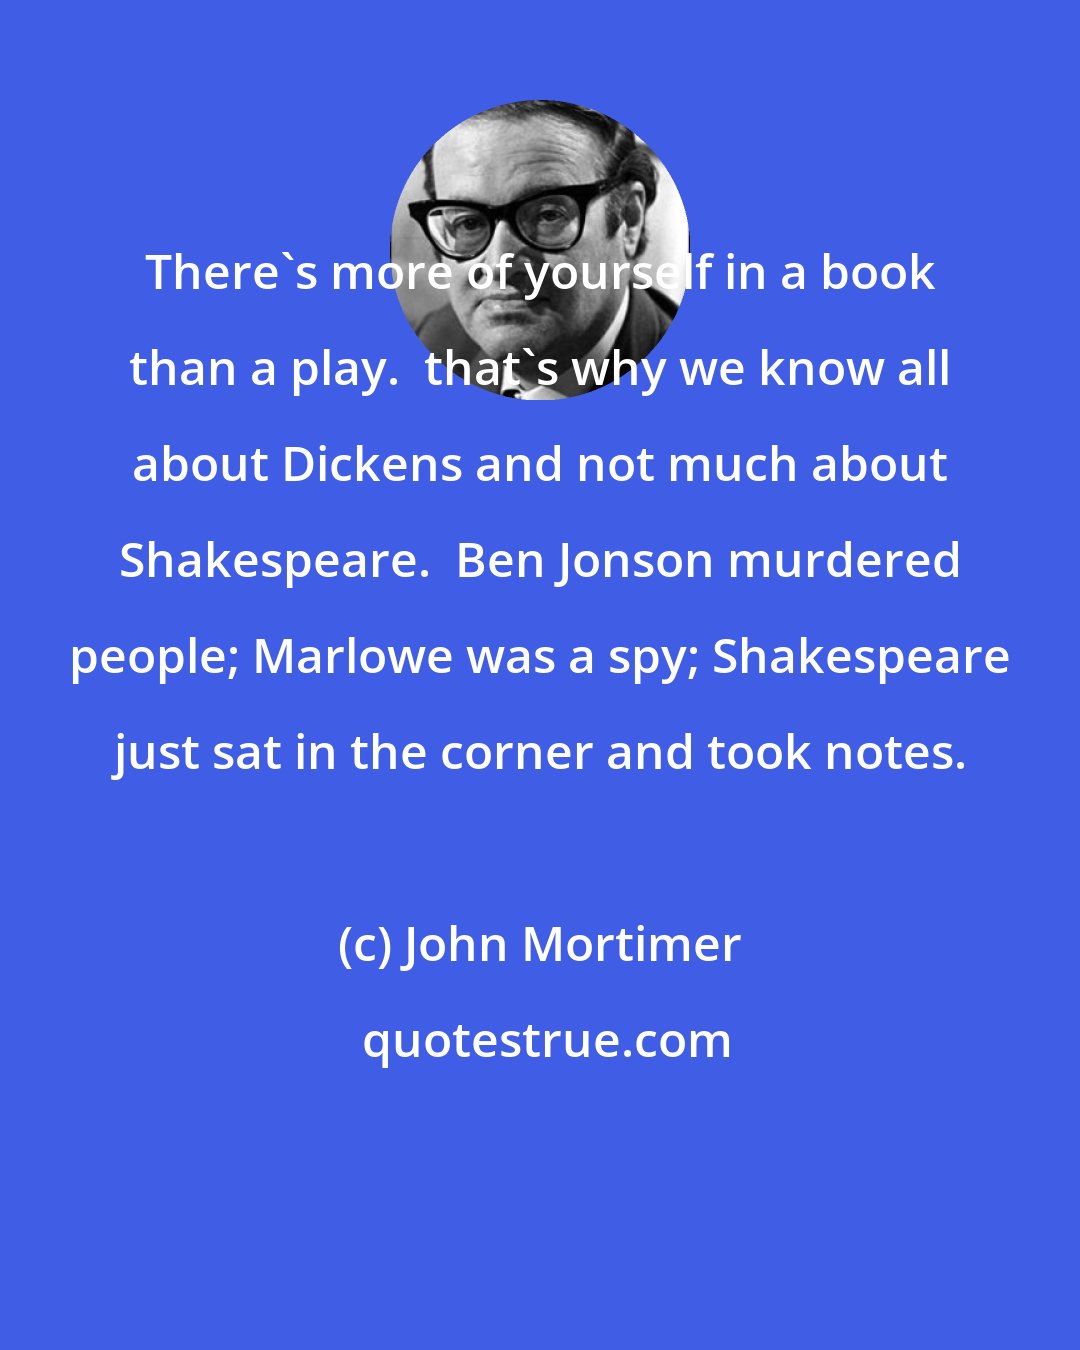 John Mortimer: There's more of yourself in a book than a play.  that's why we know all about Dickens and not much about Shakespeare.  Ben Jonson murdered people; Marlowe was a spy; Shakespeare just sat in the corner and took notes.